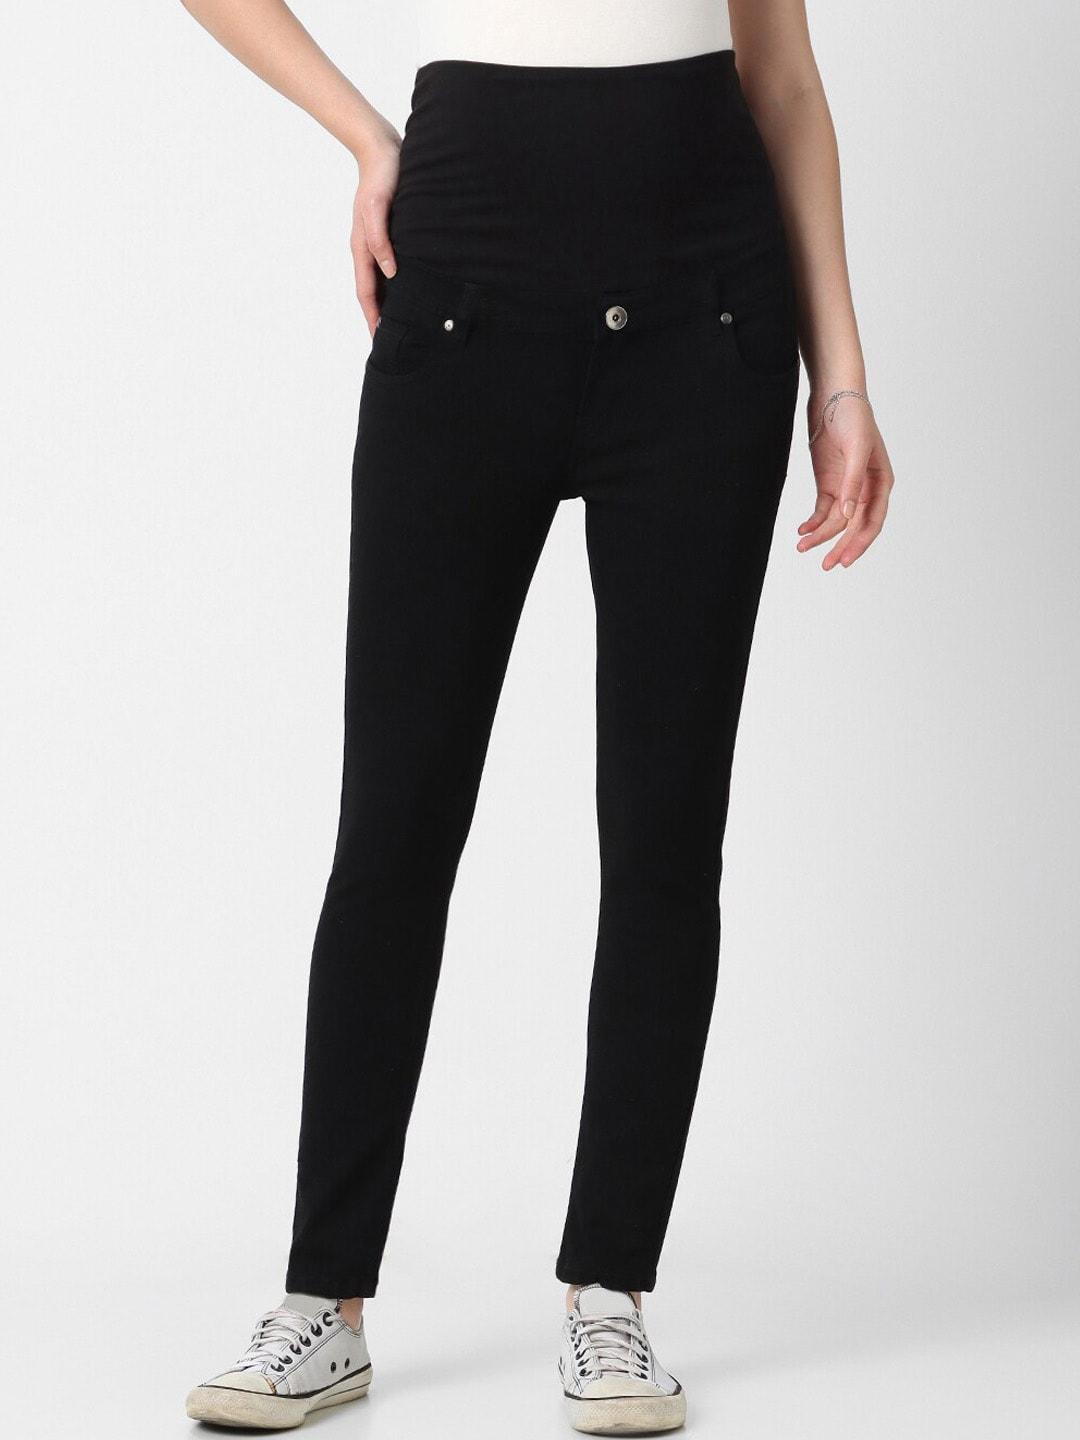 mystere-paris-women-relaxed-fit-low-rise-dark-shade-maternity-jeans